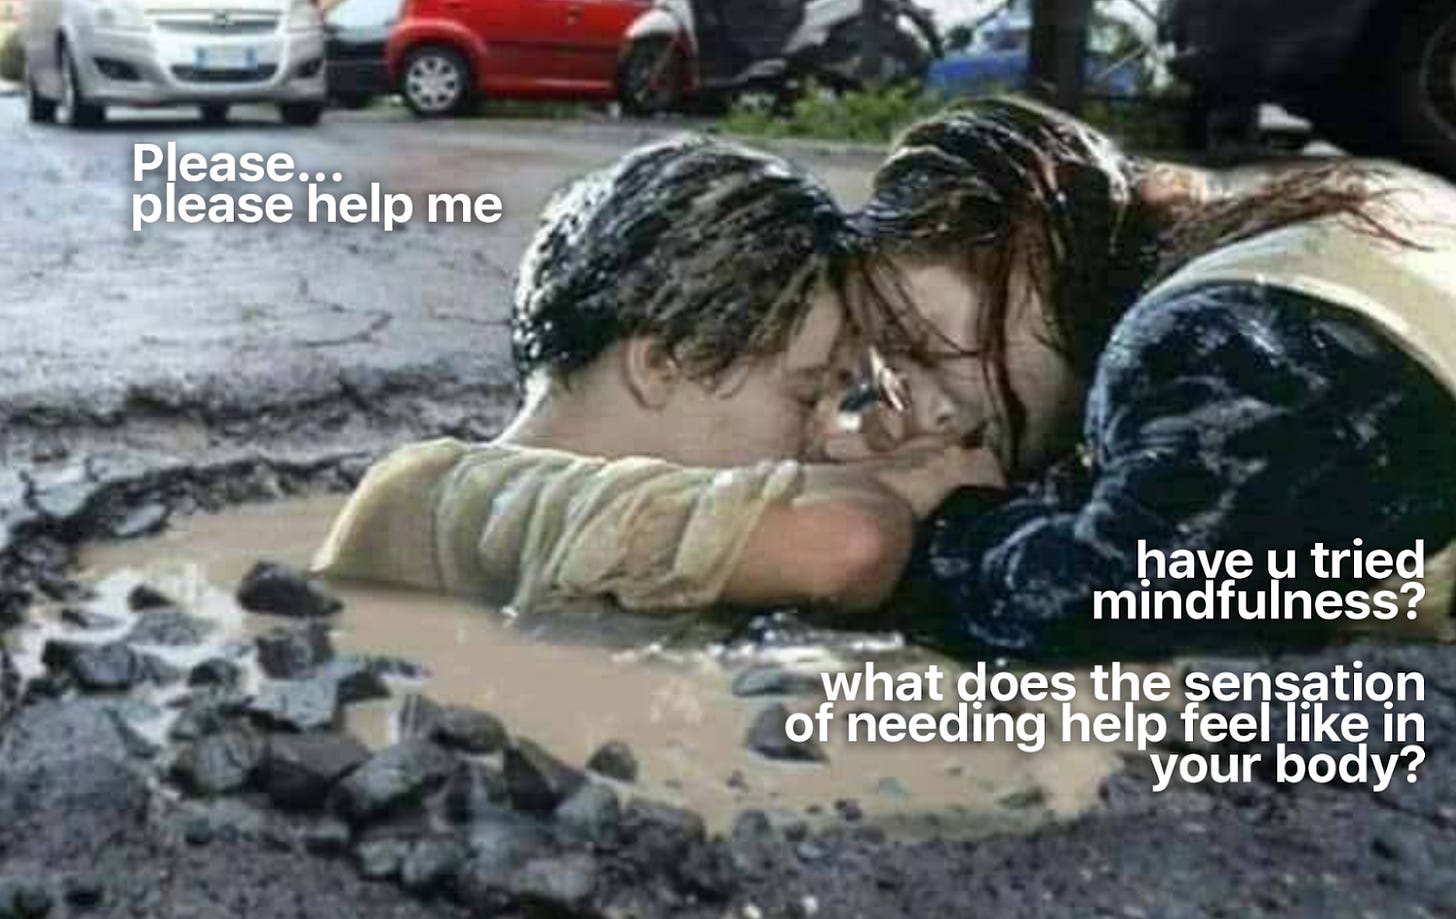 Jack and rose from the titanic, in the drowning scene. Except Jack is drowning in a pothole in the middle of a road. He is saying "Please... please help me" and Rose is saying "Have you tried mindfulness? What does the sensation of needing help feel like in your body?"